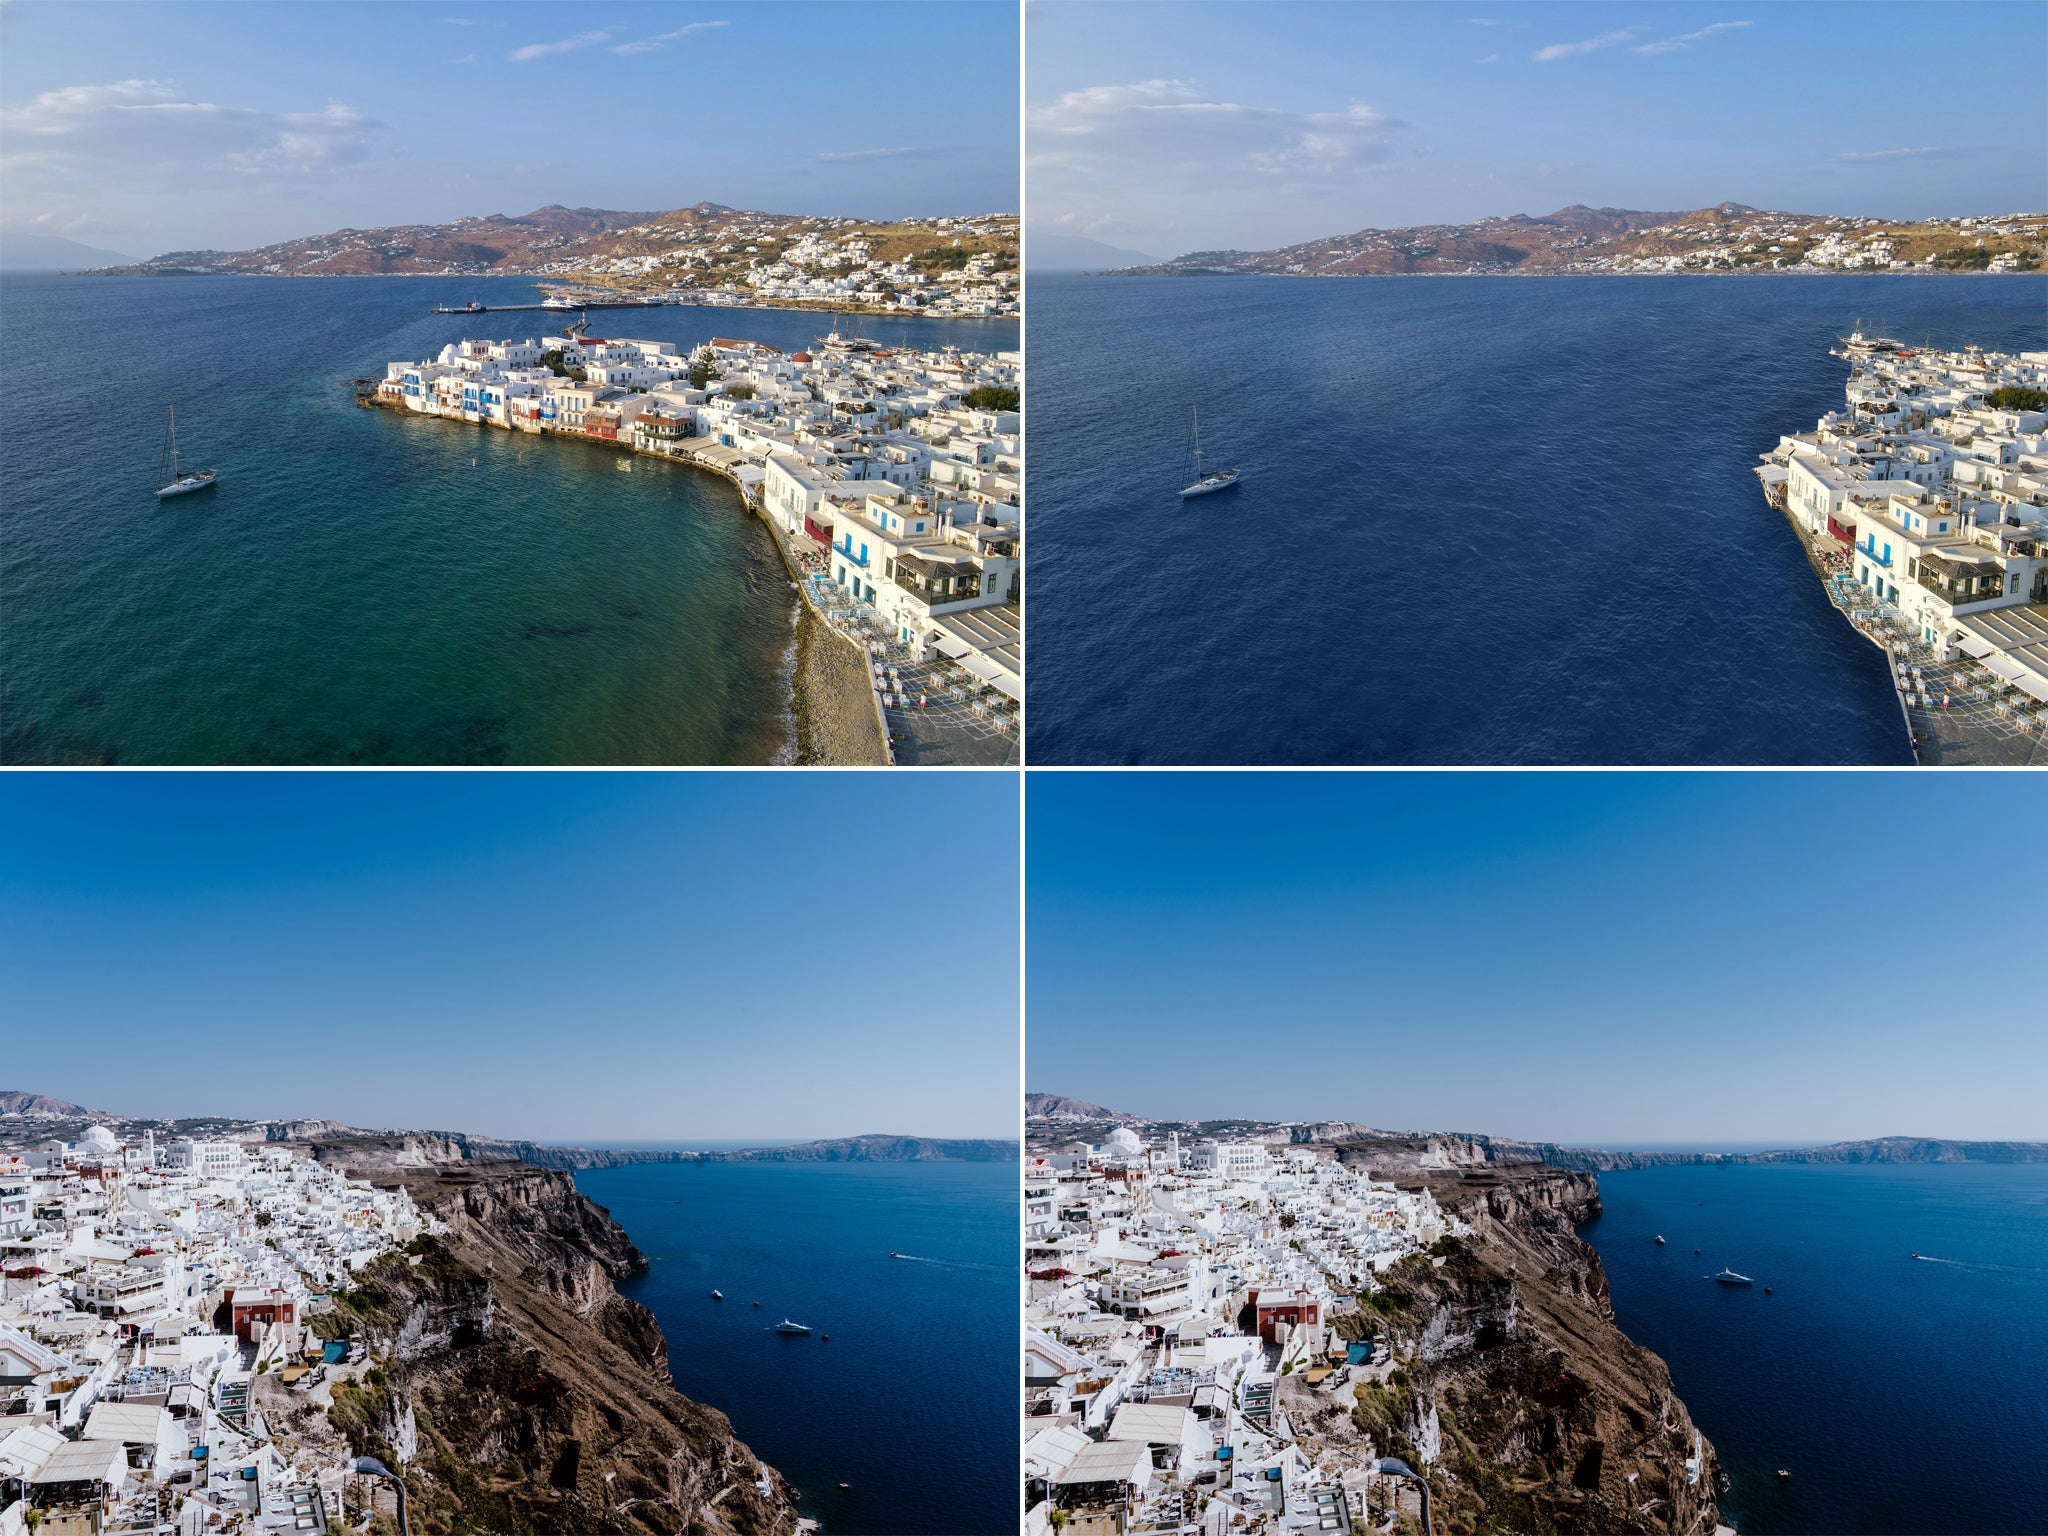 Images show how Greece’s coastline could change to erosion by end of century